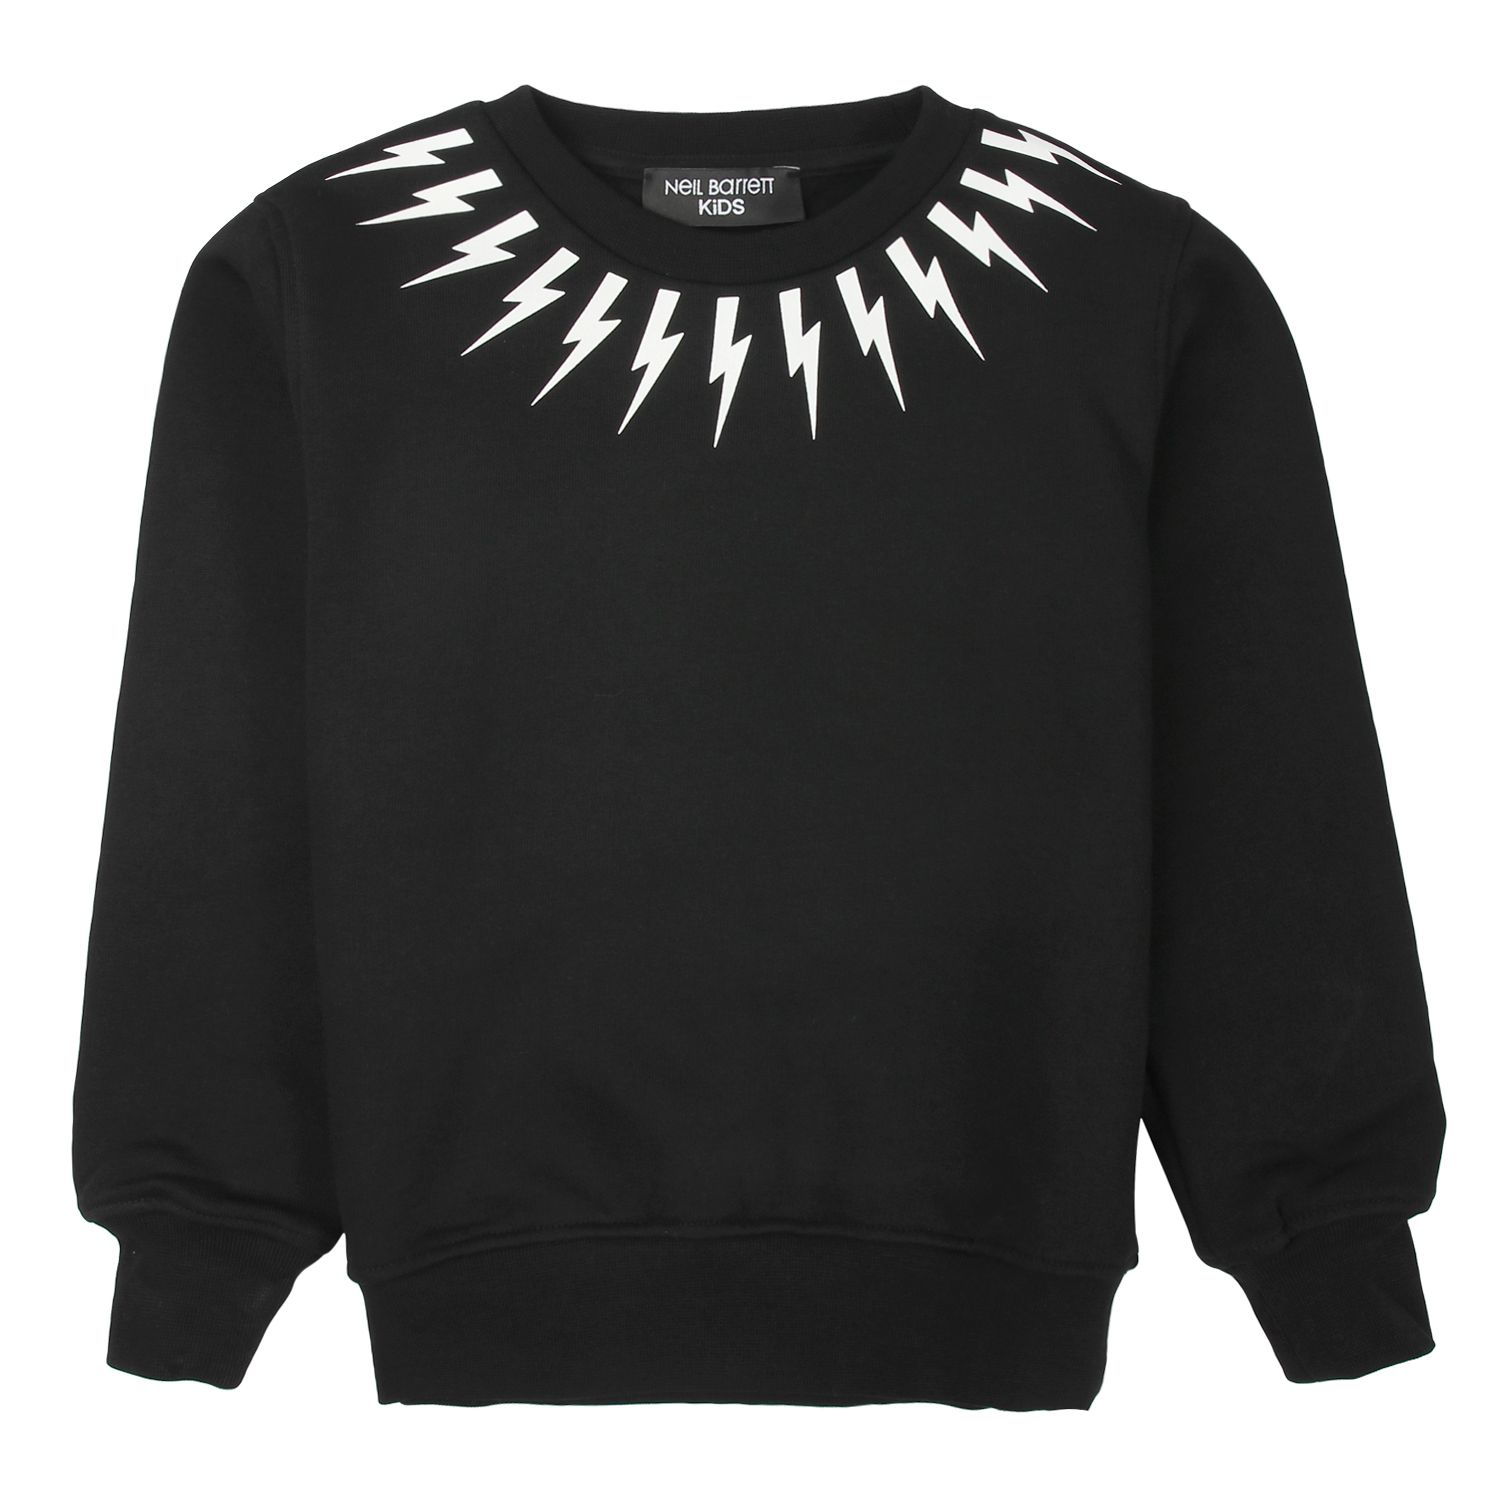 Neil Barrett black sweatshirt -Details long-sleeved sweatshirt with elastic cuffs, U-neck, black background, lightning bolts printed at the crew neck, front and back, contrasting color -Washing max 30 °